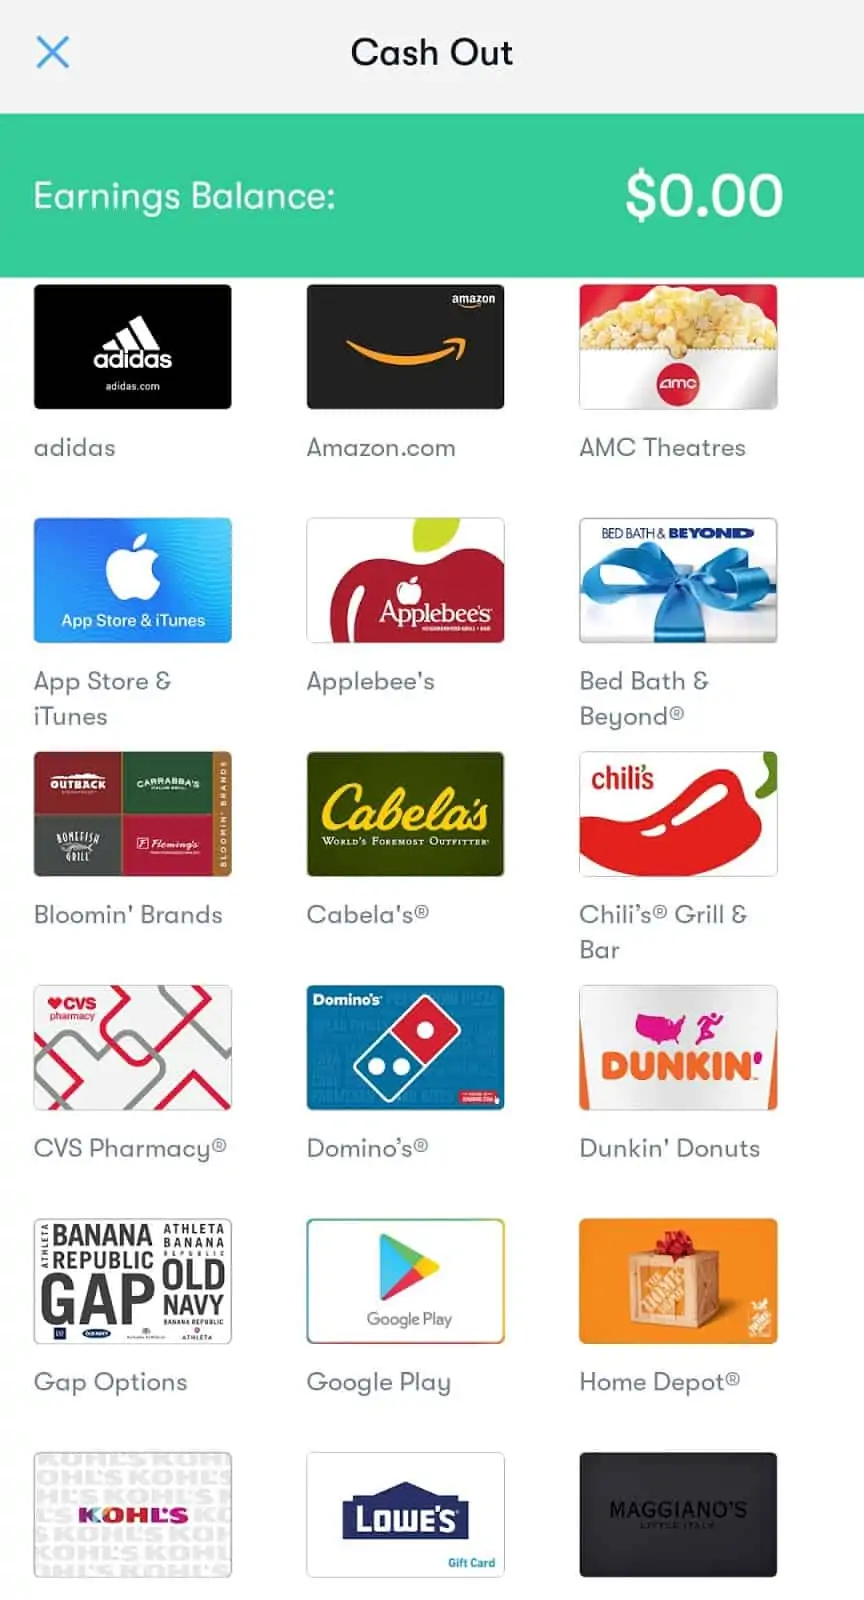 GetUpside review: Gift card options to cash out